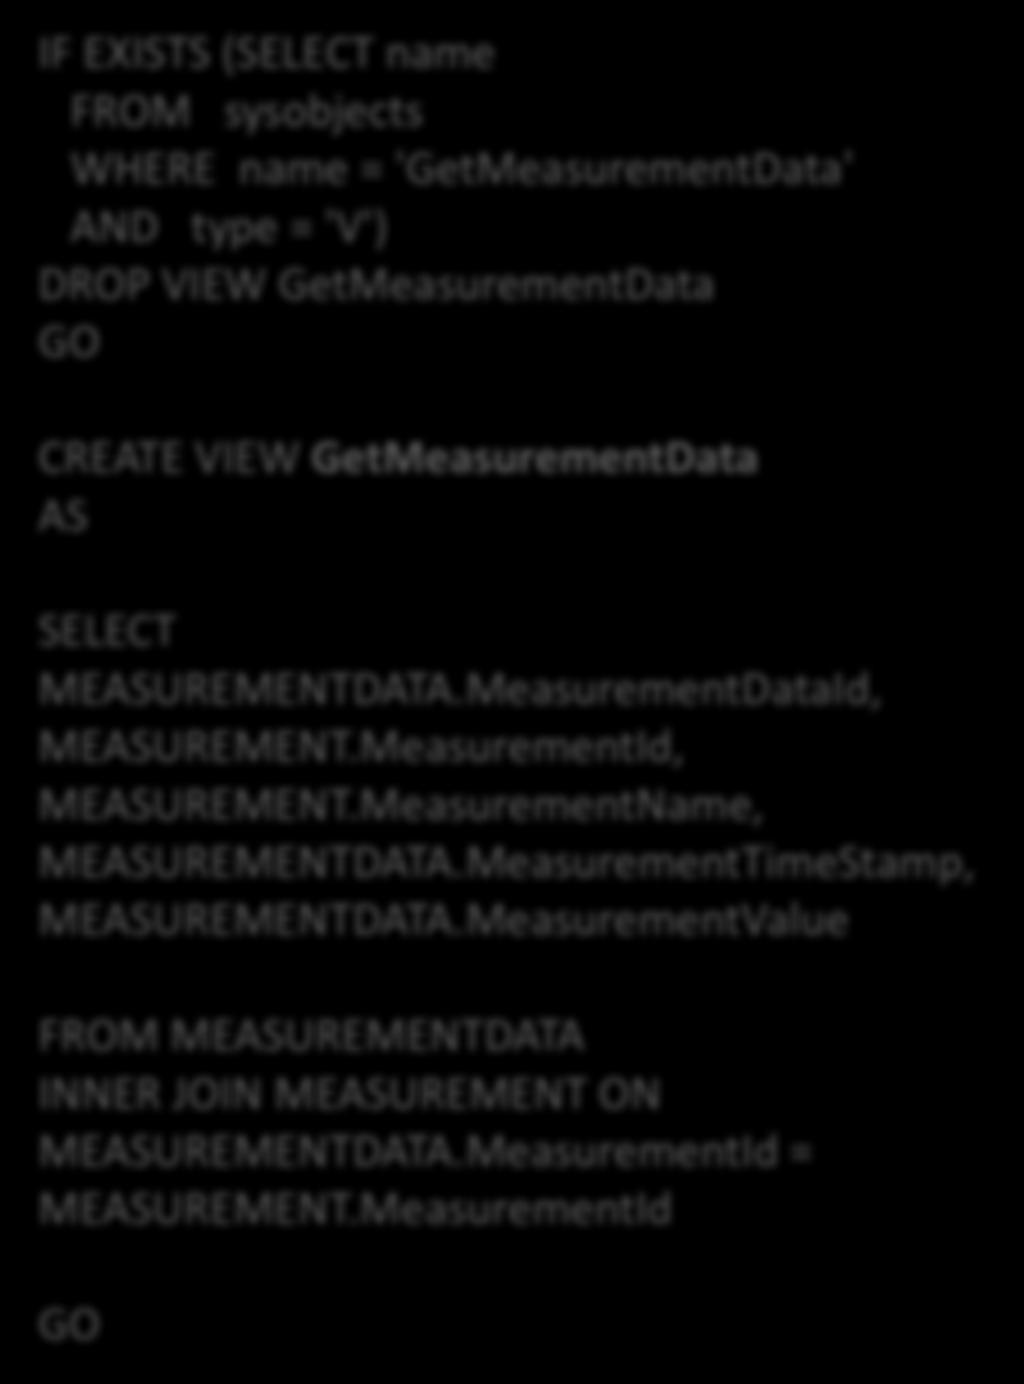 View A View is used to collect Data from multiple Tables IF EXISTS (SELECT name FROM sysobjects WHERE name = 'GetMeasurementData' AND type = 'V') DROP VIEW GetMeasurementData GO CREATE VIEW